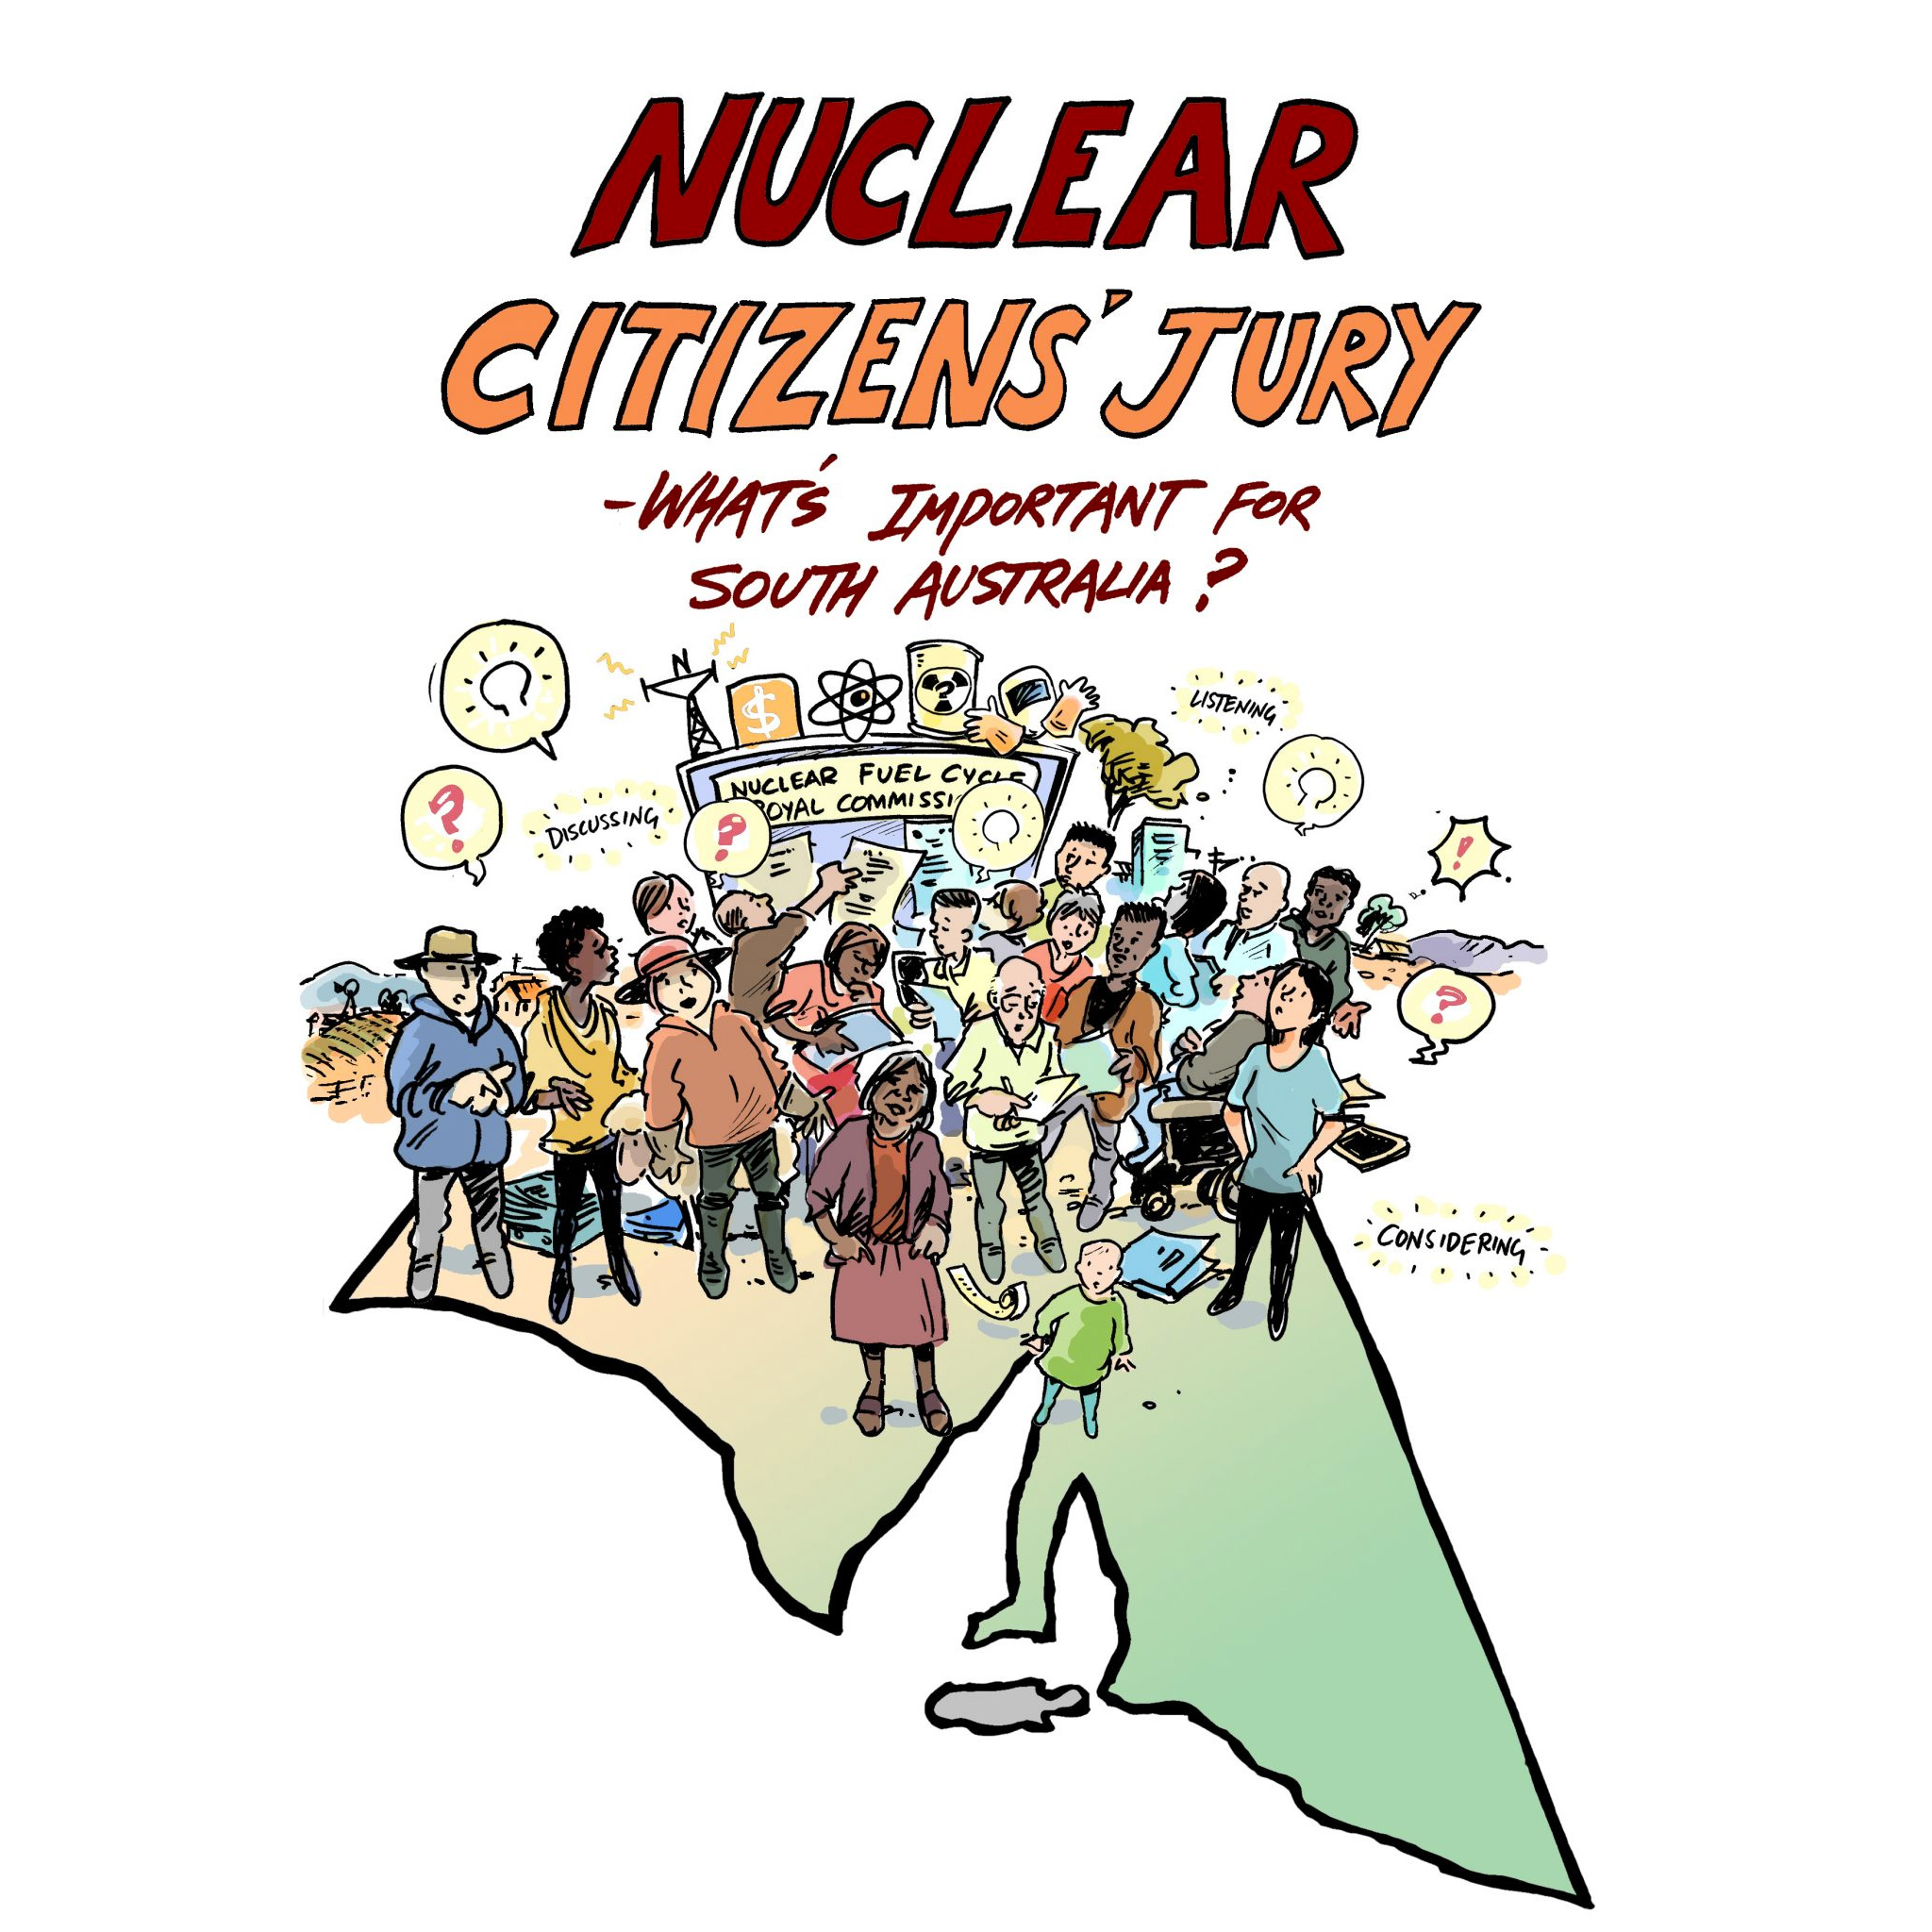 Nuclear-Citizens-Jury-pic